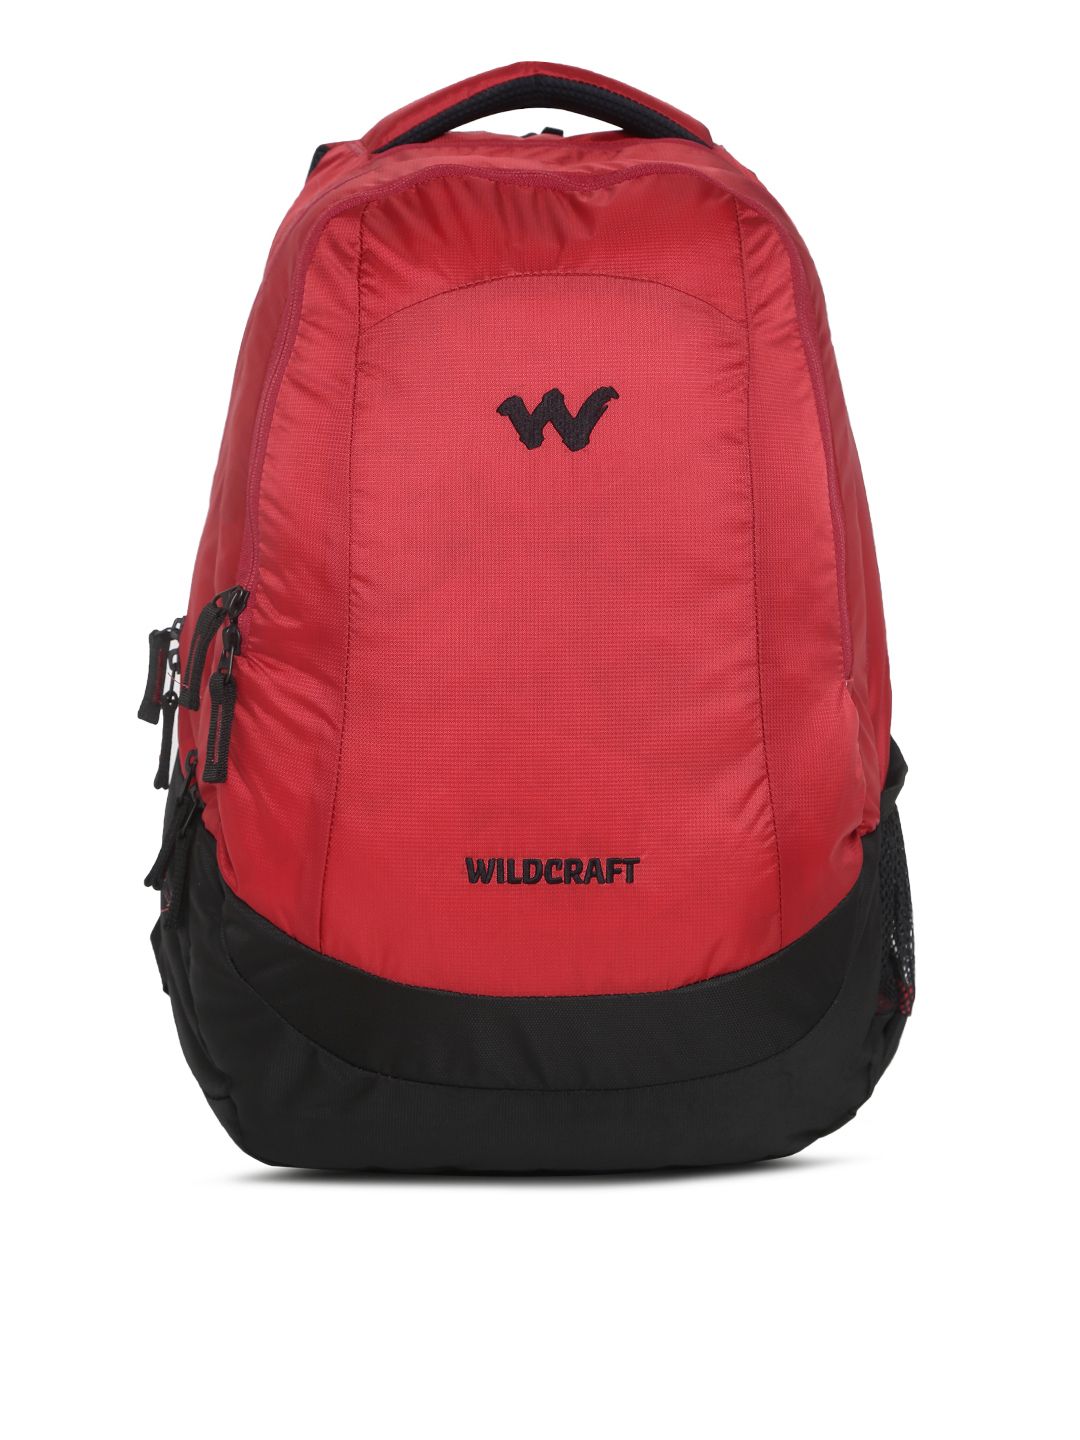 Wildcraft Unisex Red & Black Colourblocked Peza Laptop Backpack Price in India